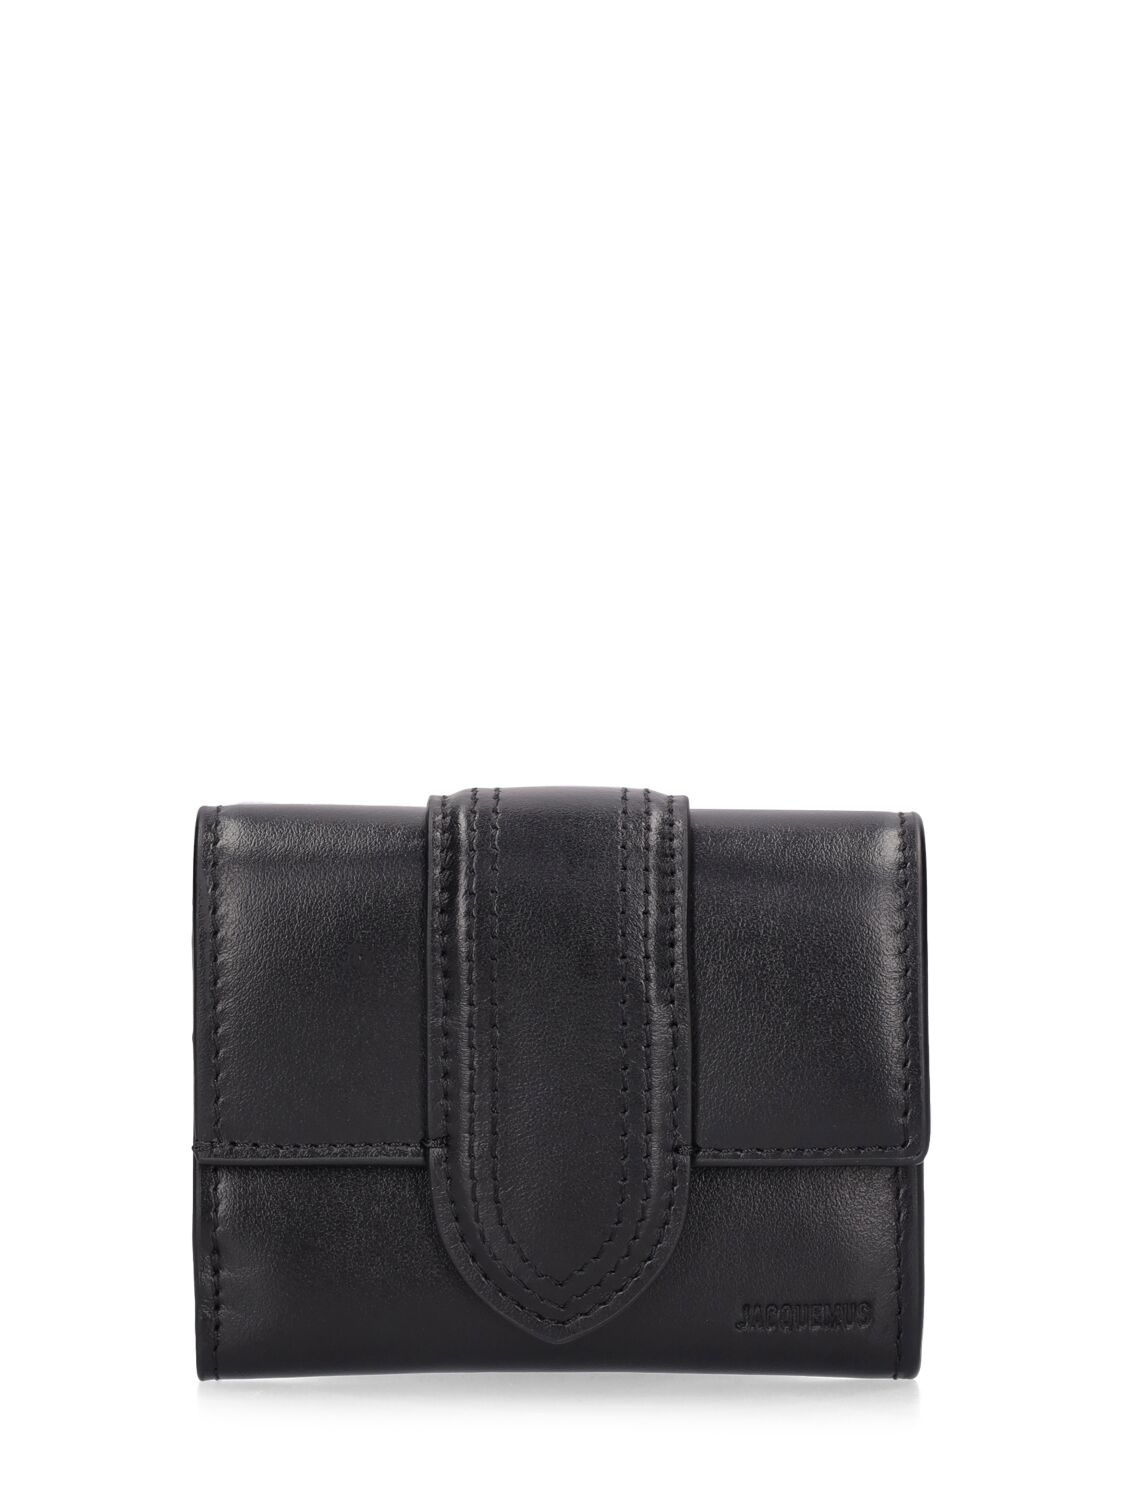 Image of Le Compact Bambino Leather Wallet